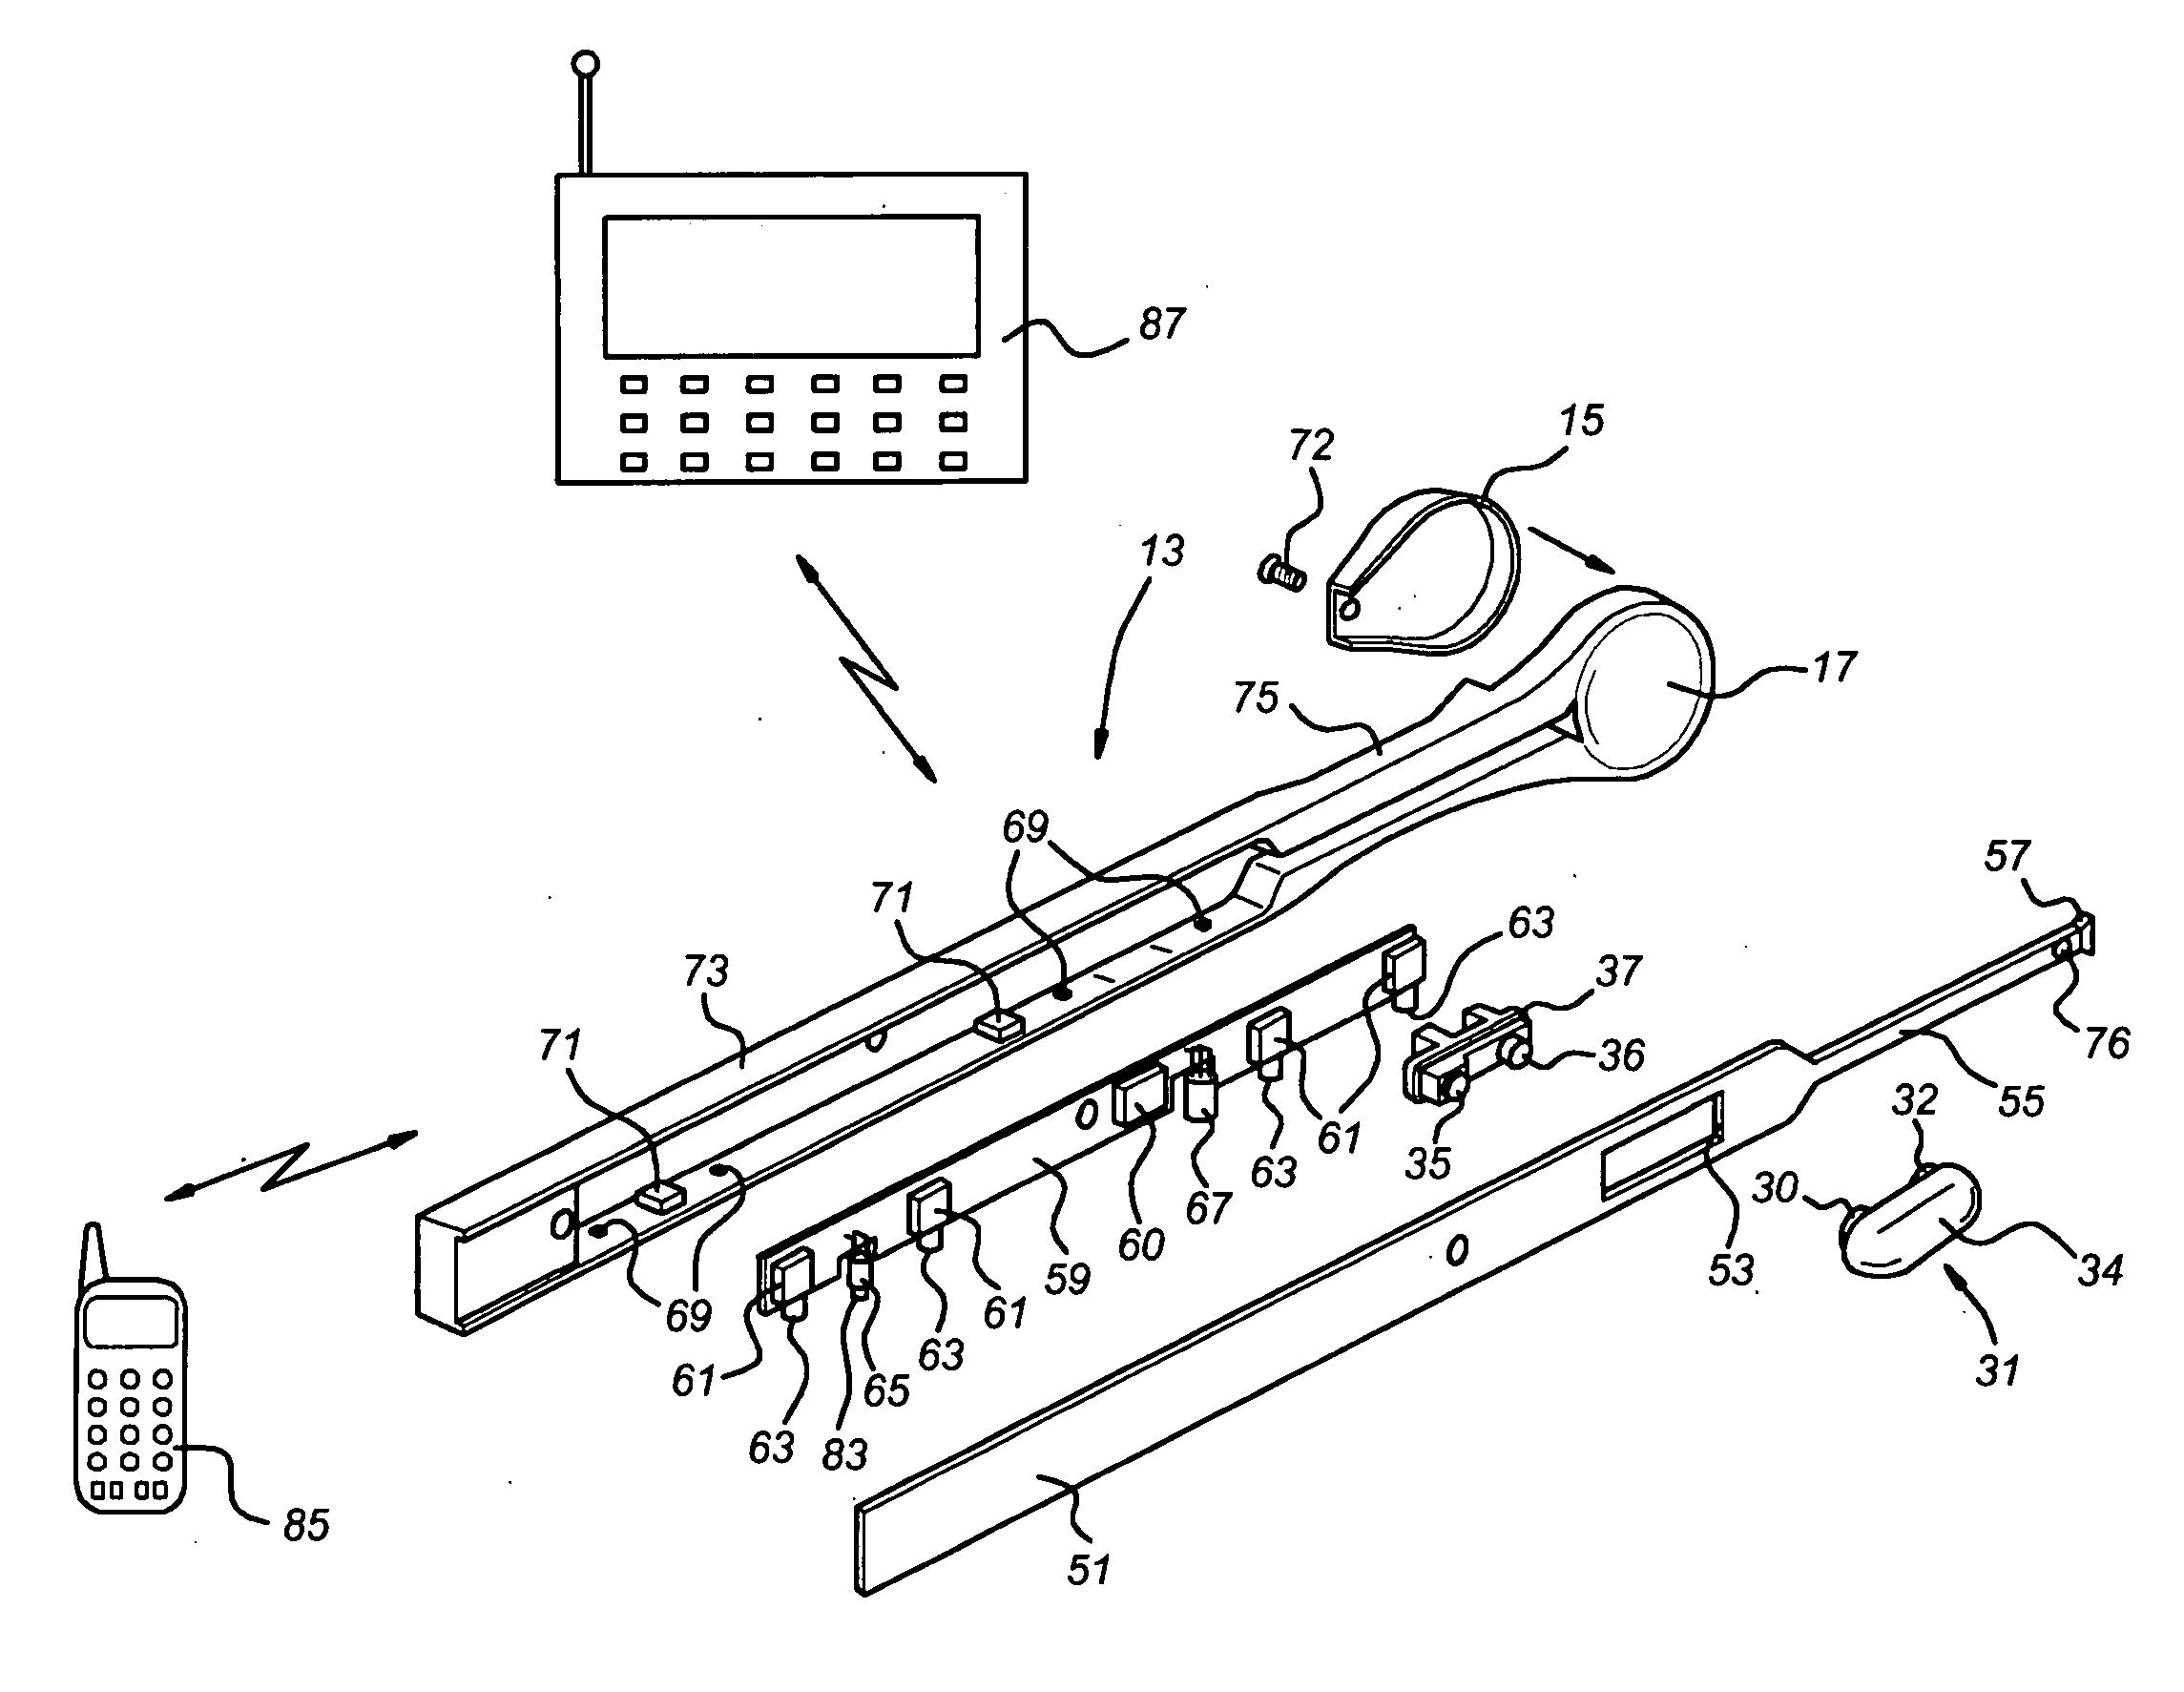 Connector assembly for connecting an earpiece of a hearing aid to glasses temple